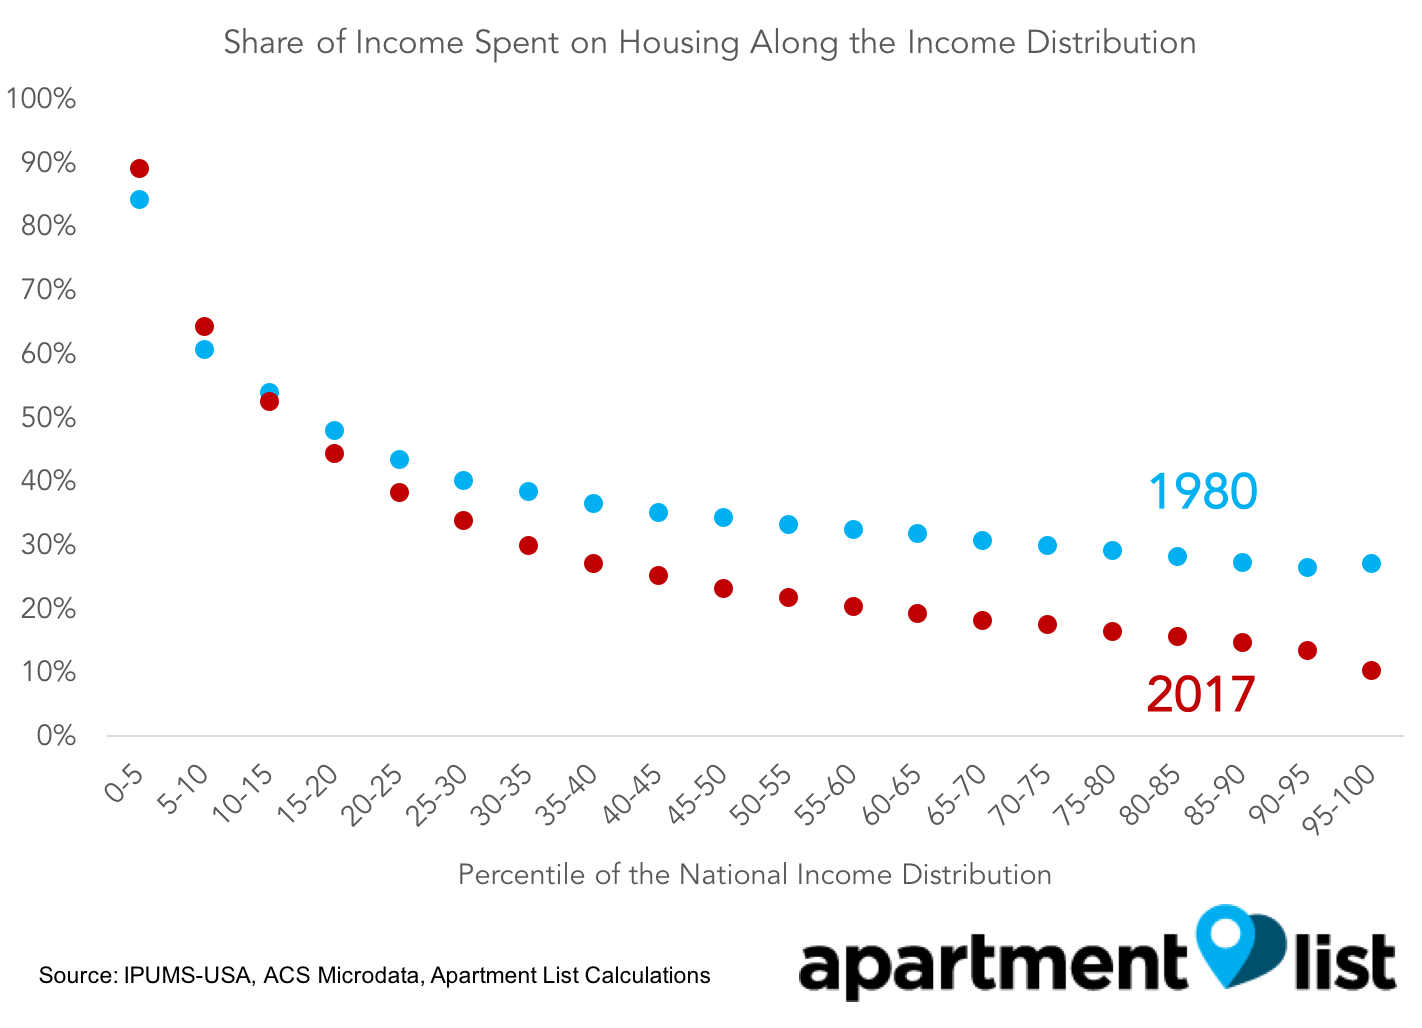 Share of income spent on housing along the income distribution